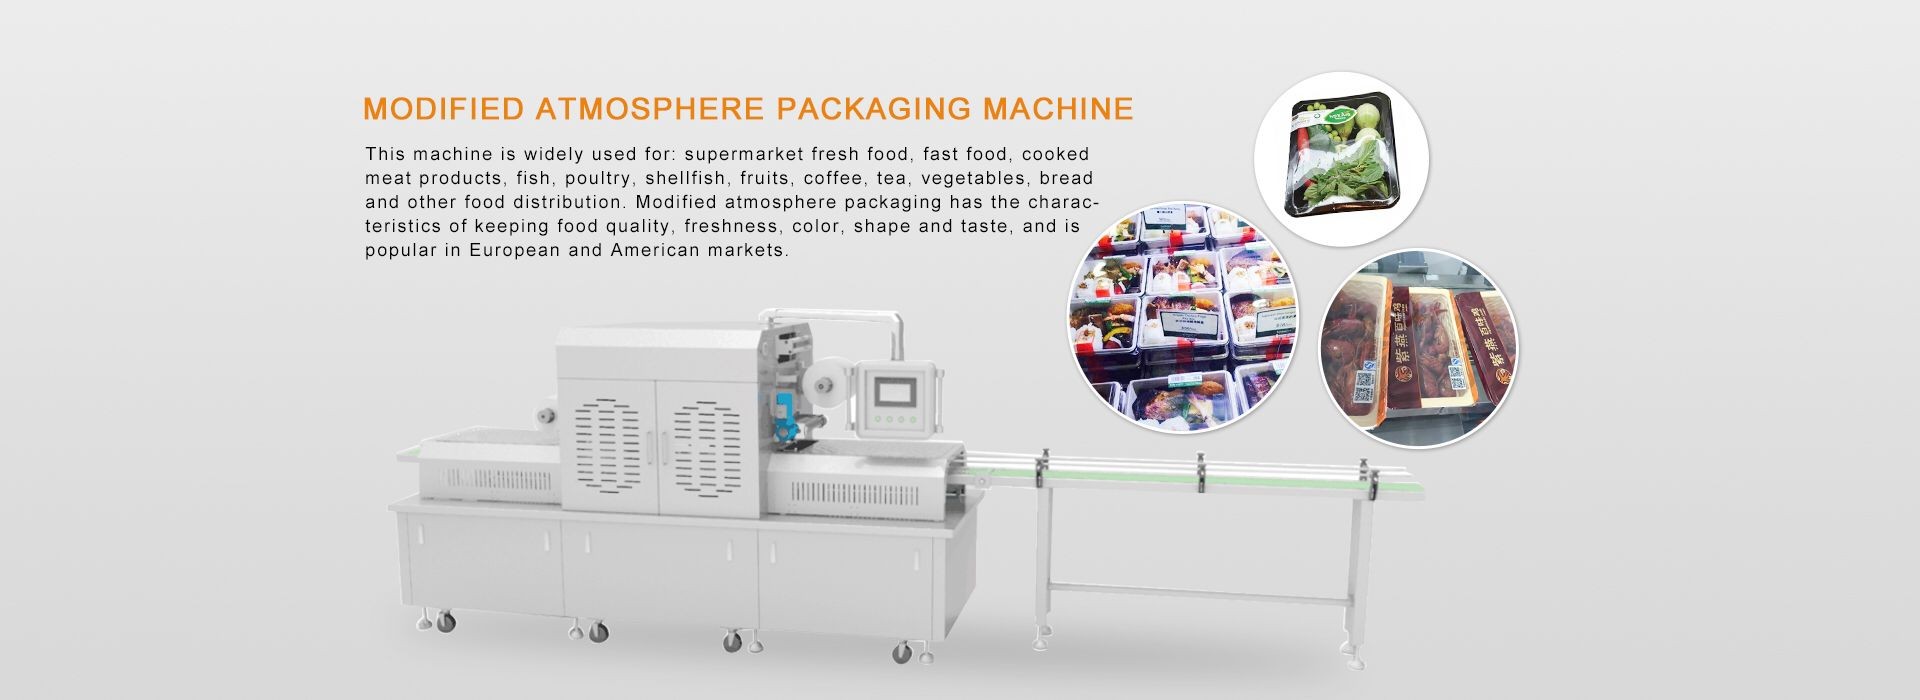 Modified Atmosphere Packaging Maschine